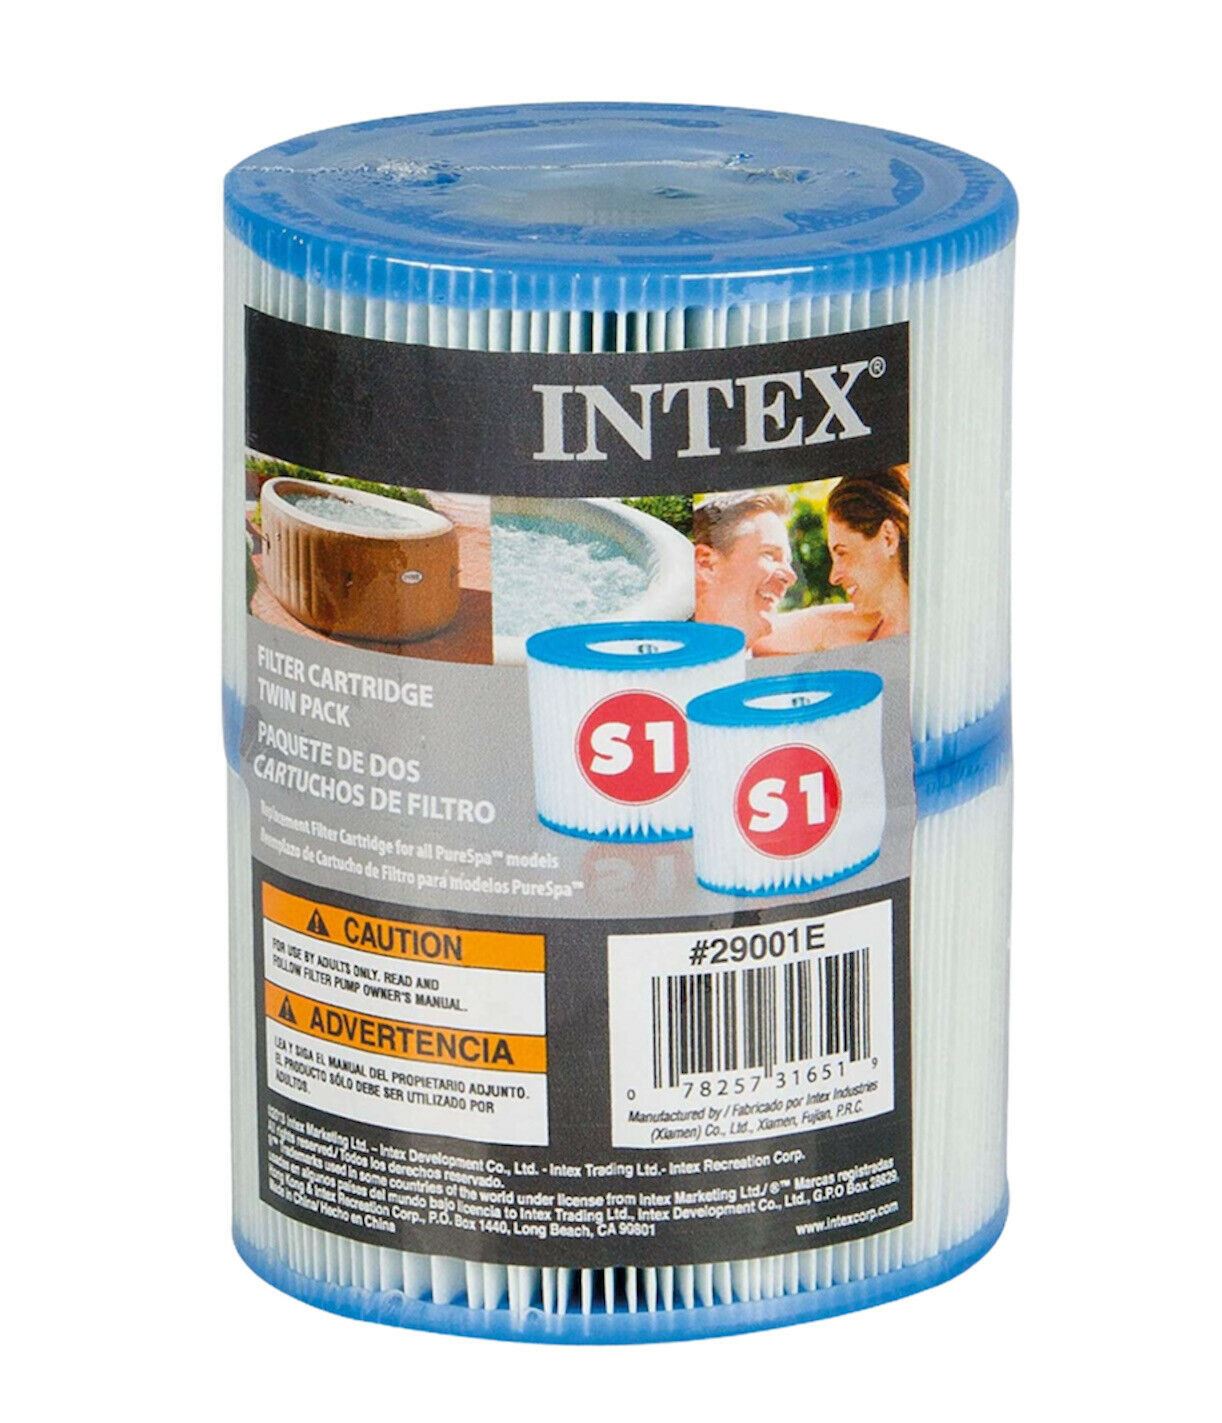 Intex Filter Cartridge - Type S1 - in Twin Packs GEEZY - The Magic Toy Shop